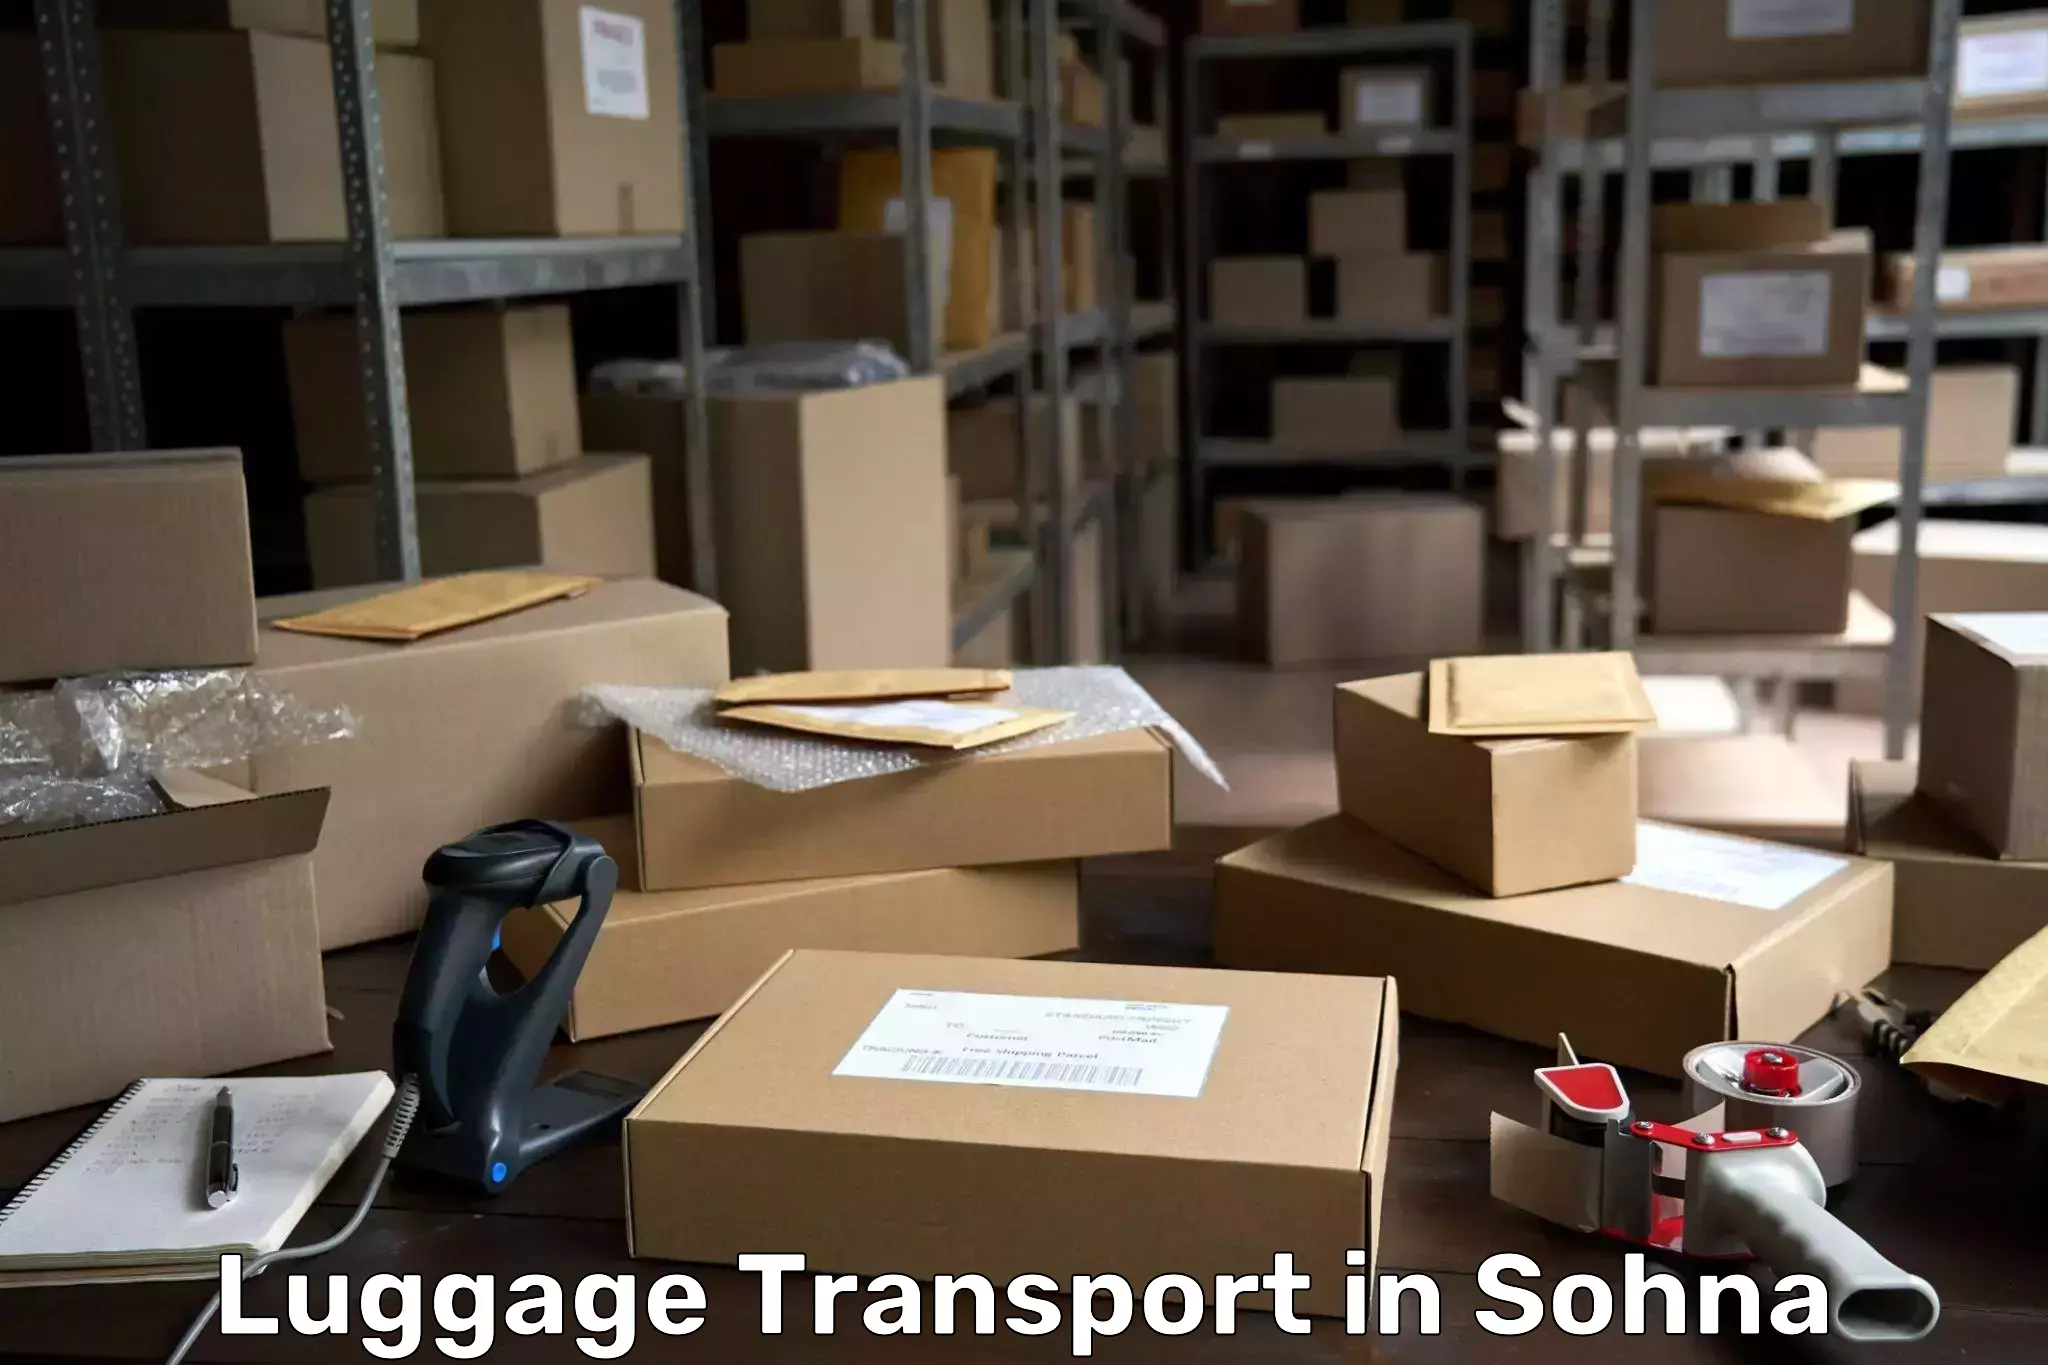 Luggage transport consultancy in Sohna